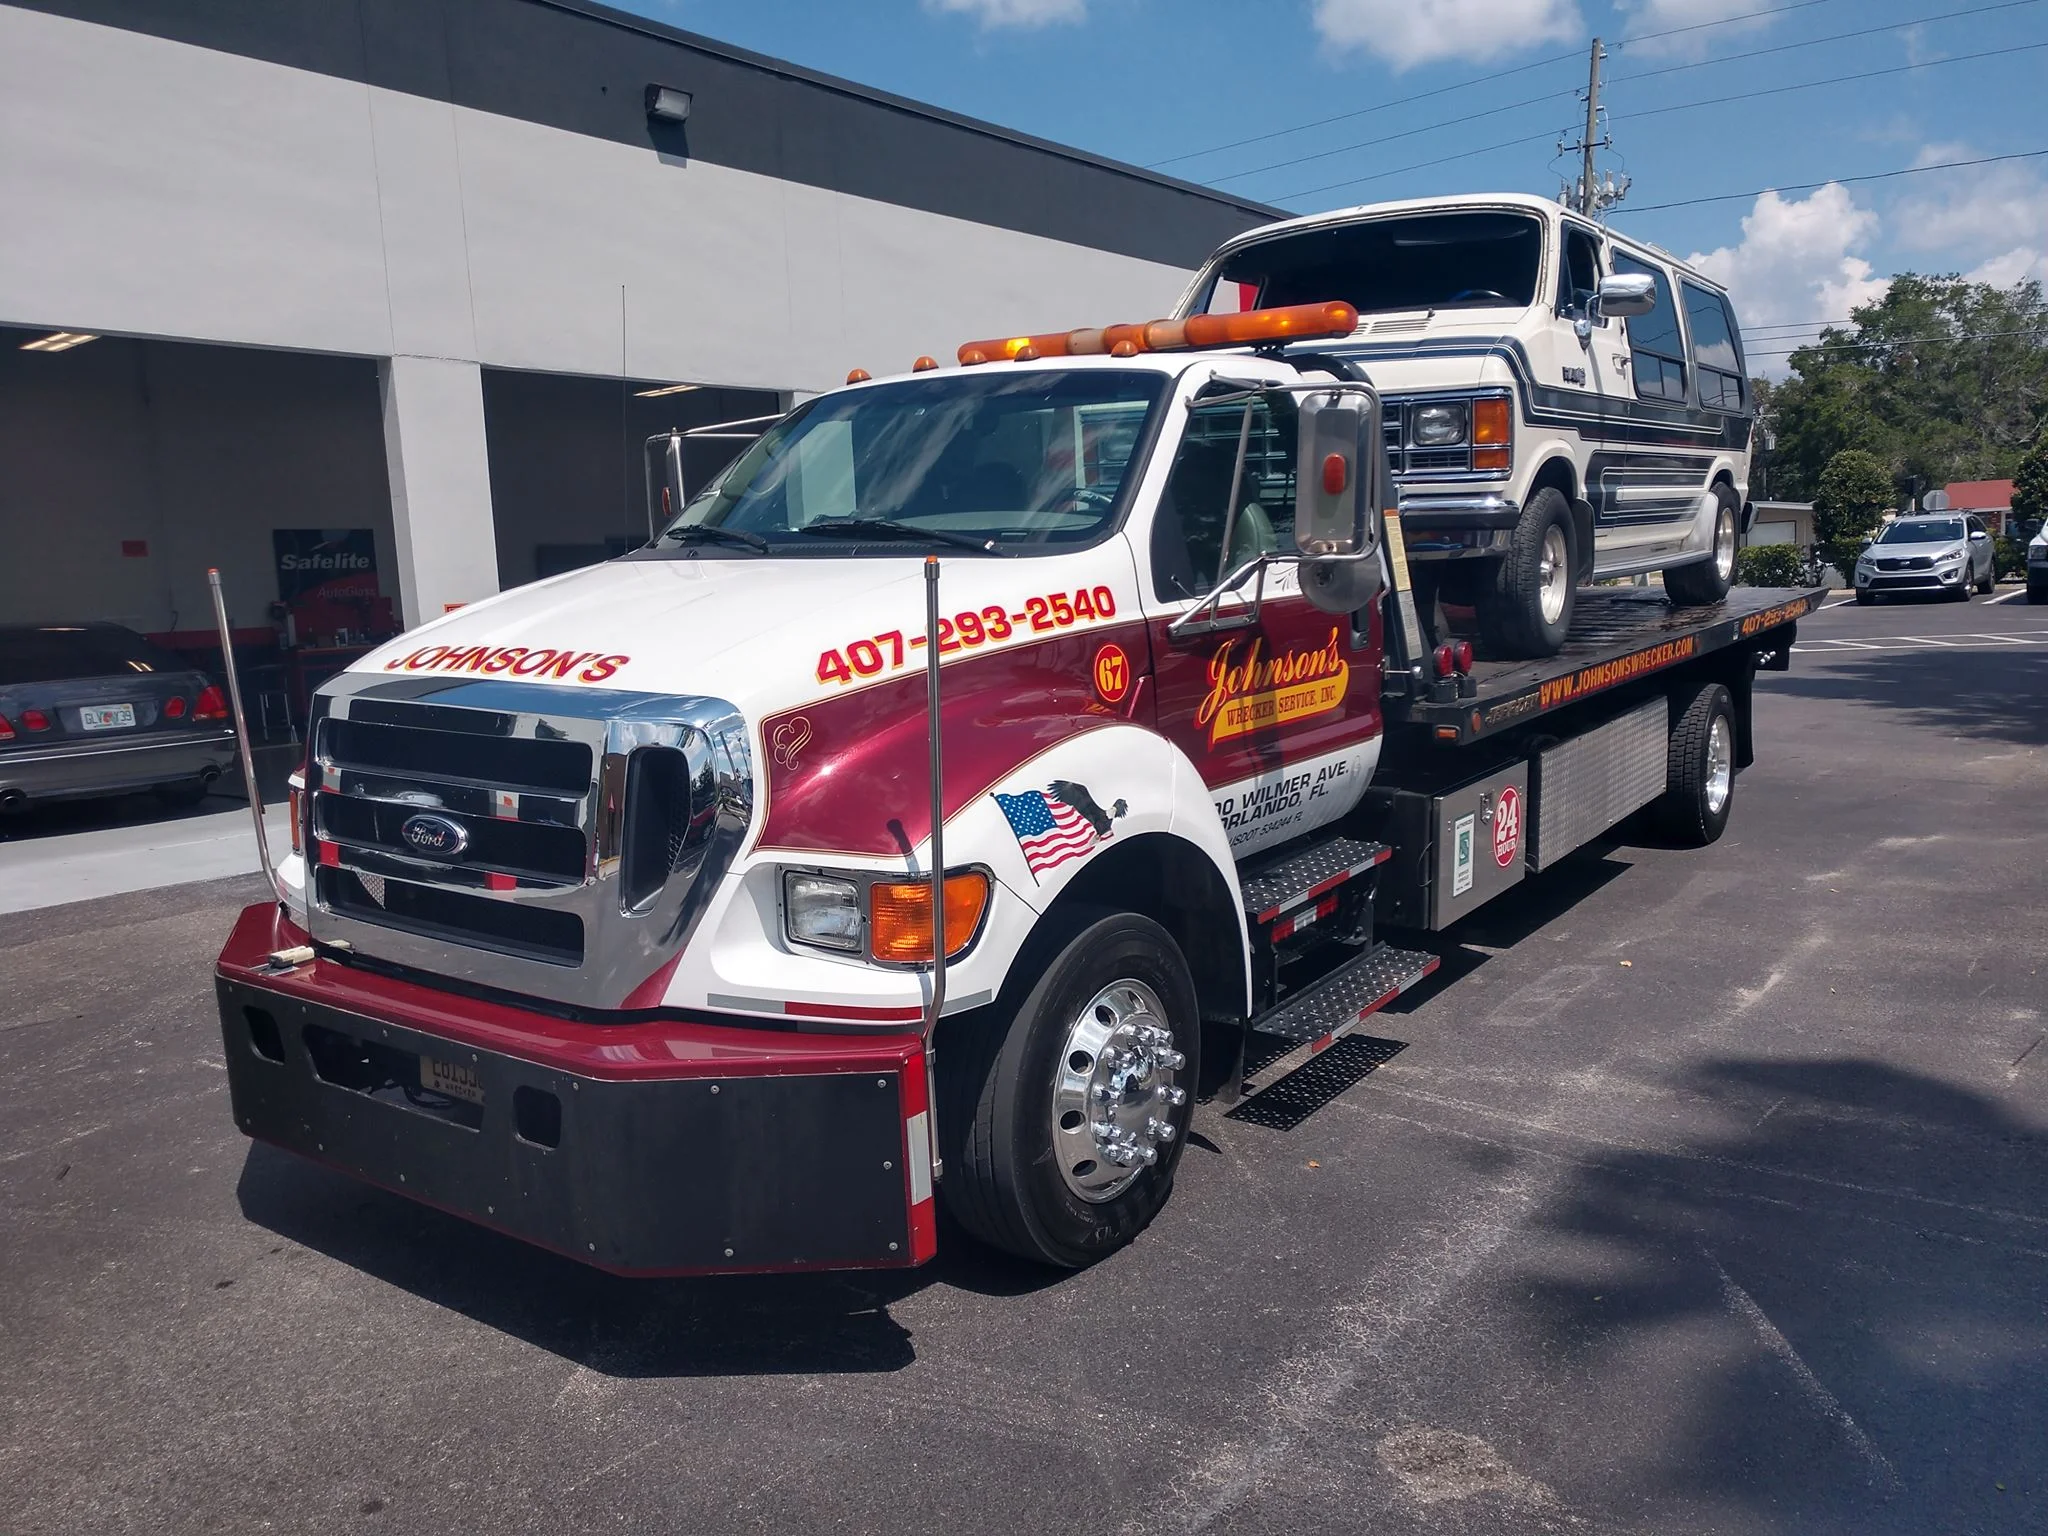 24/7 Towing Company in Summerport Beach, FL